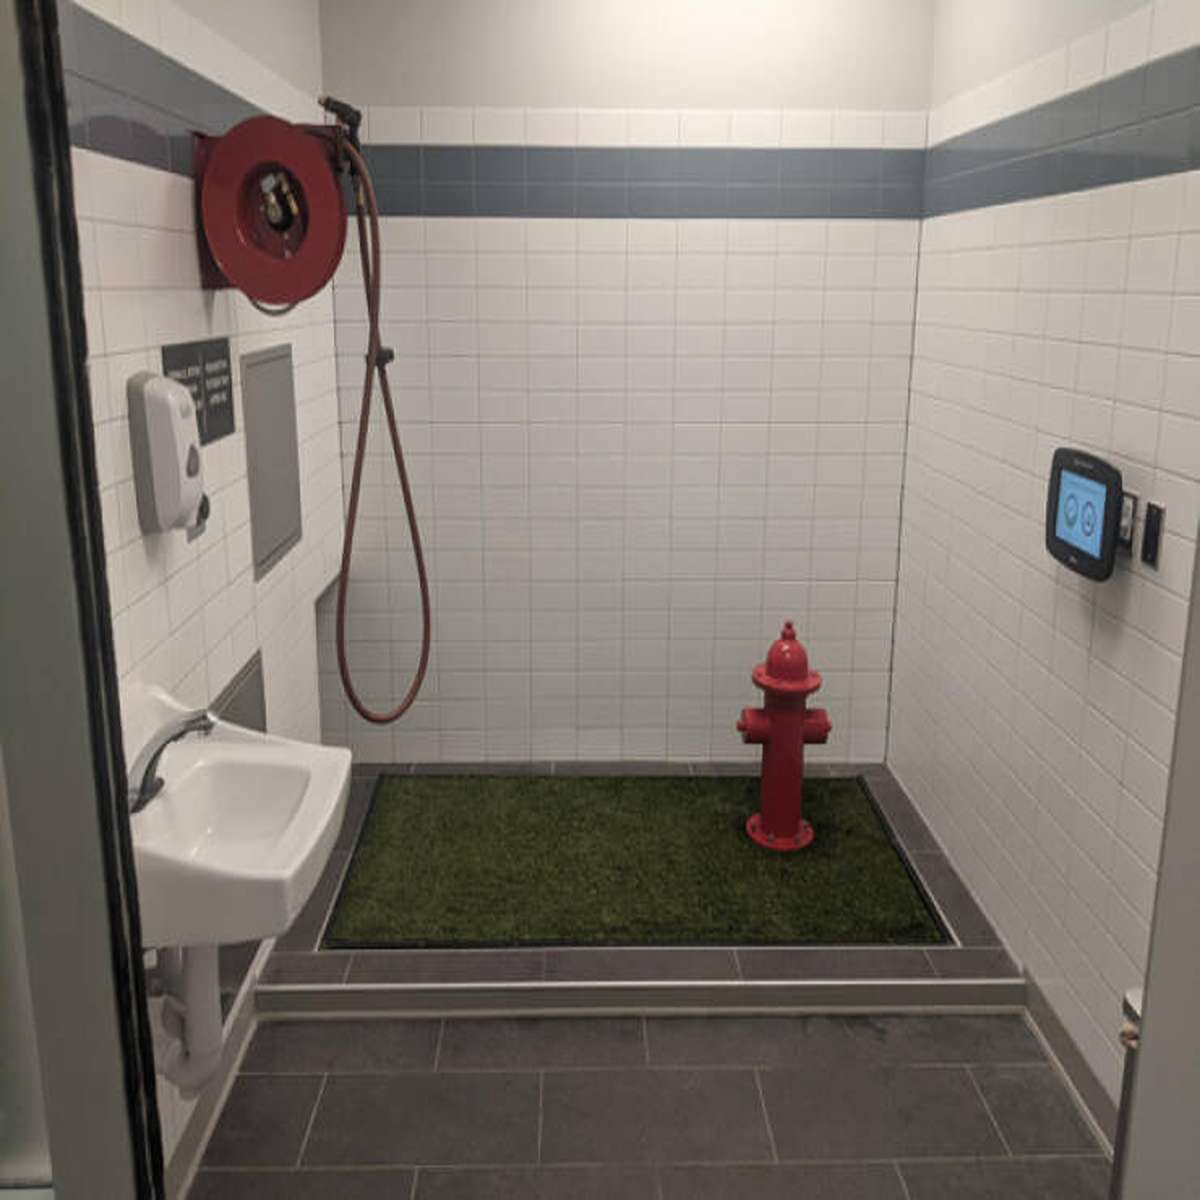 This airport has a bathroom for service animals.